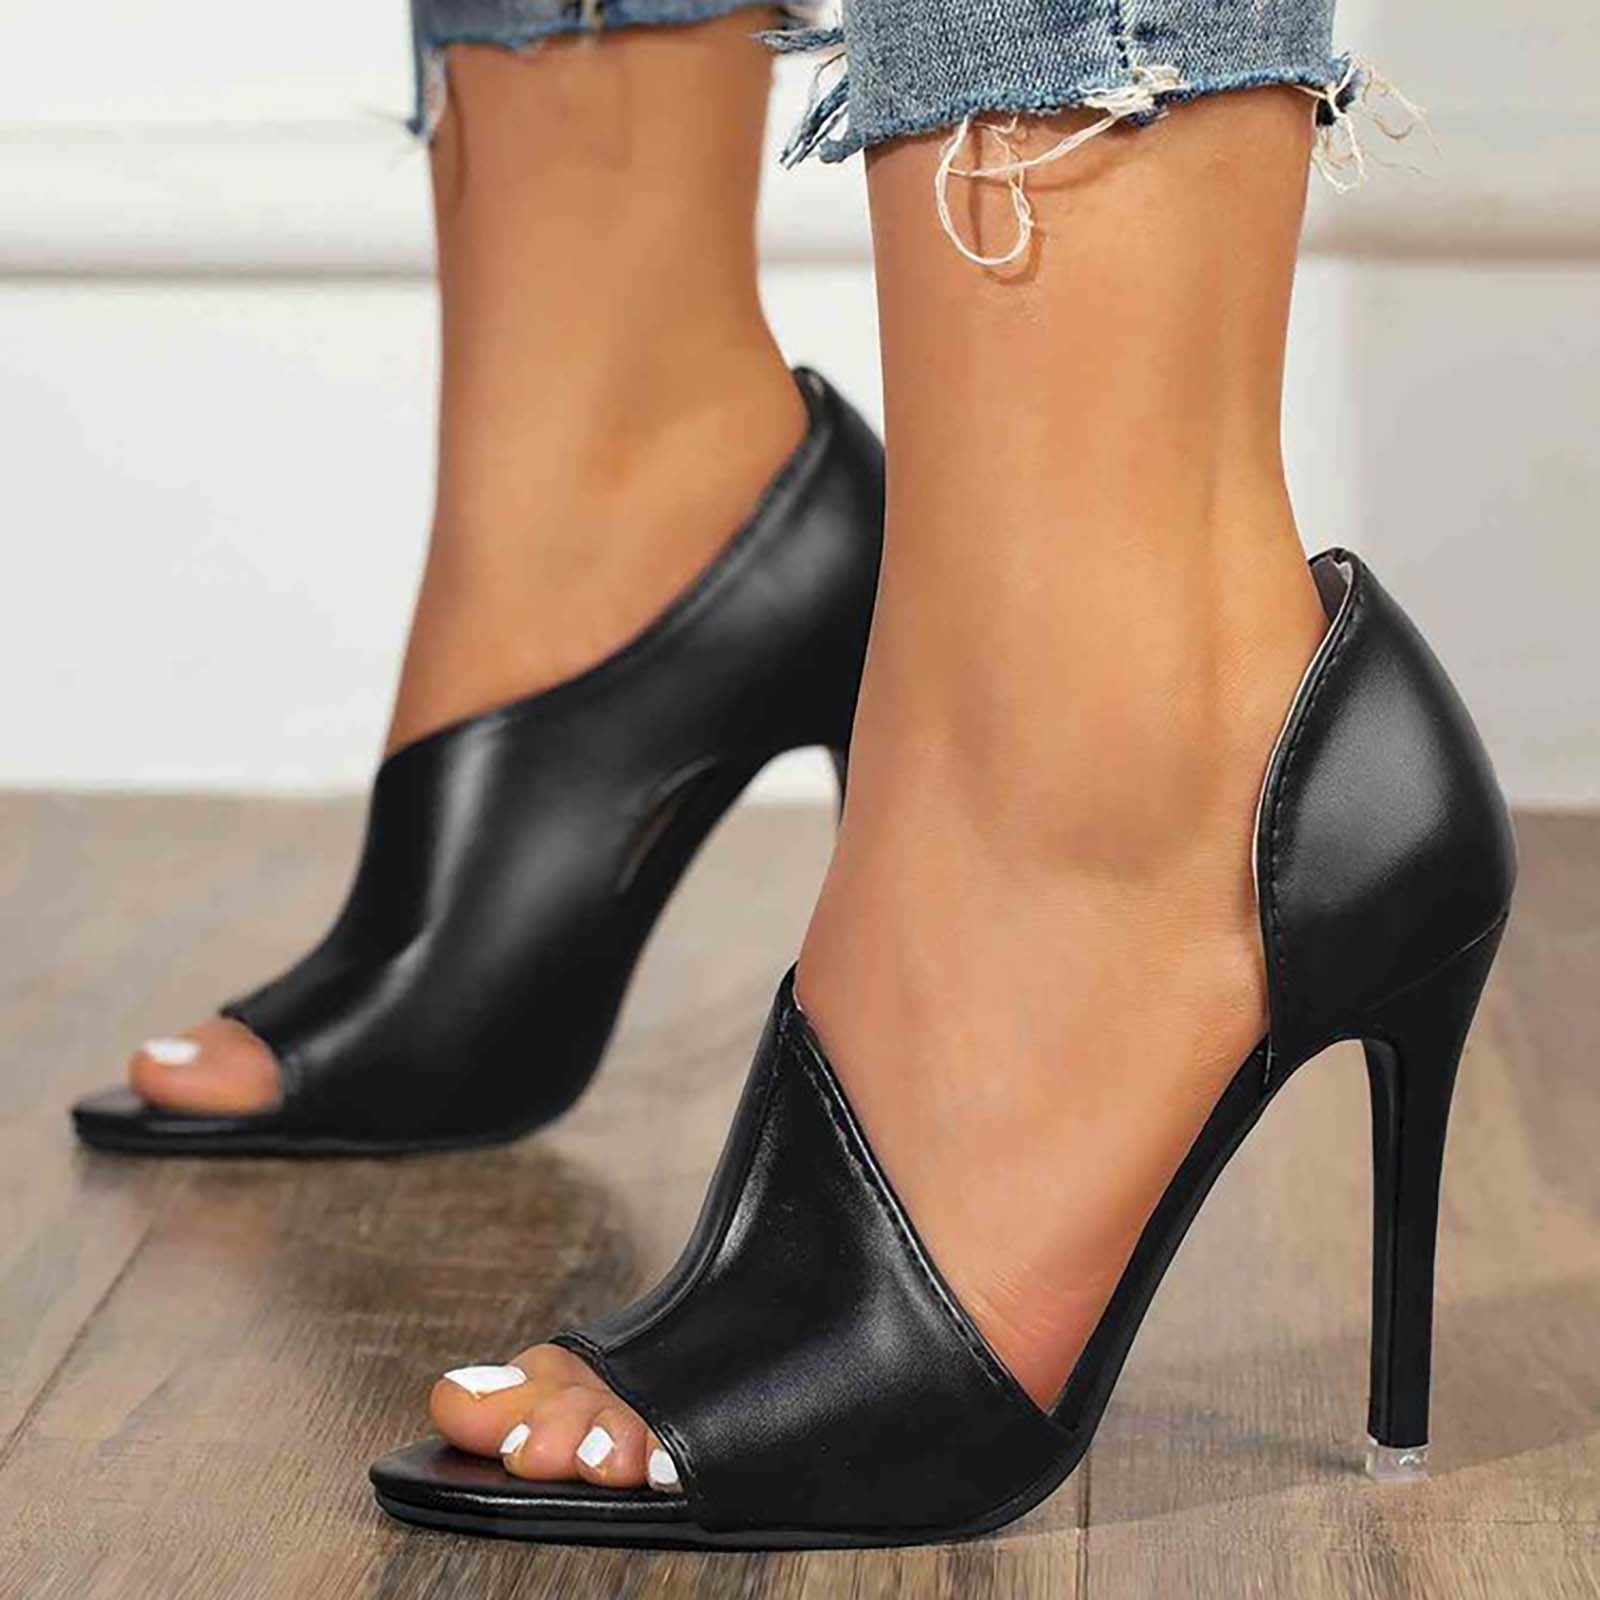 CHGBMOK Clearance Heels for Women Shoes Vintage Stitching Sandals Super High  Heel Pointed Toe Casual Stilettos Pumps - Walmart.com